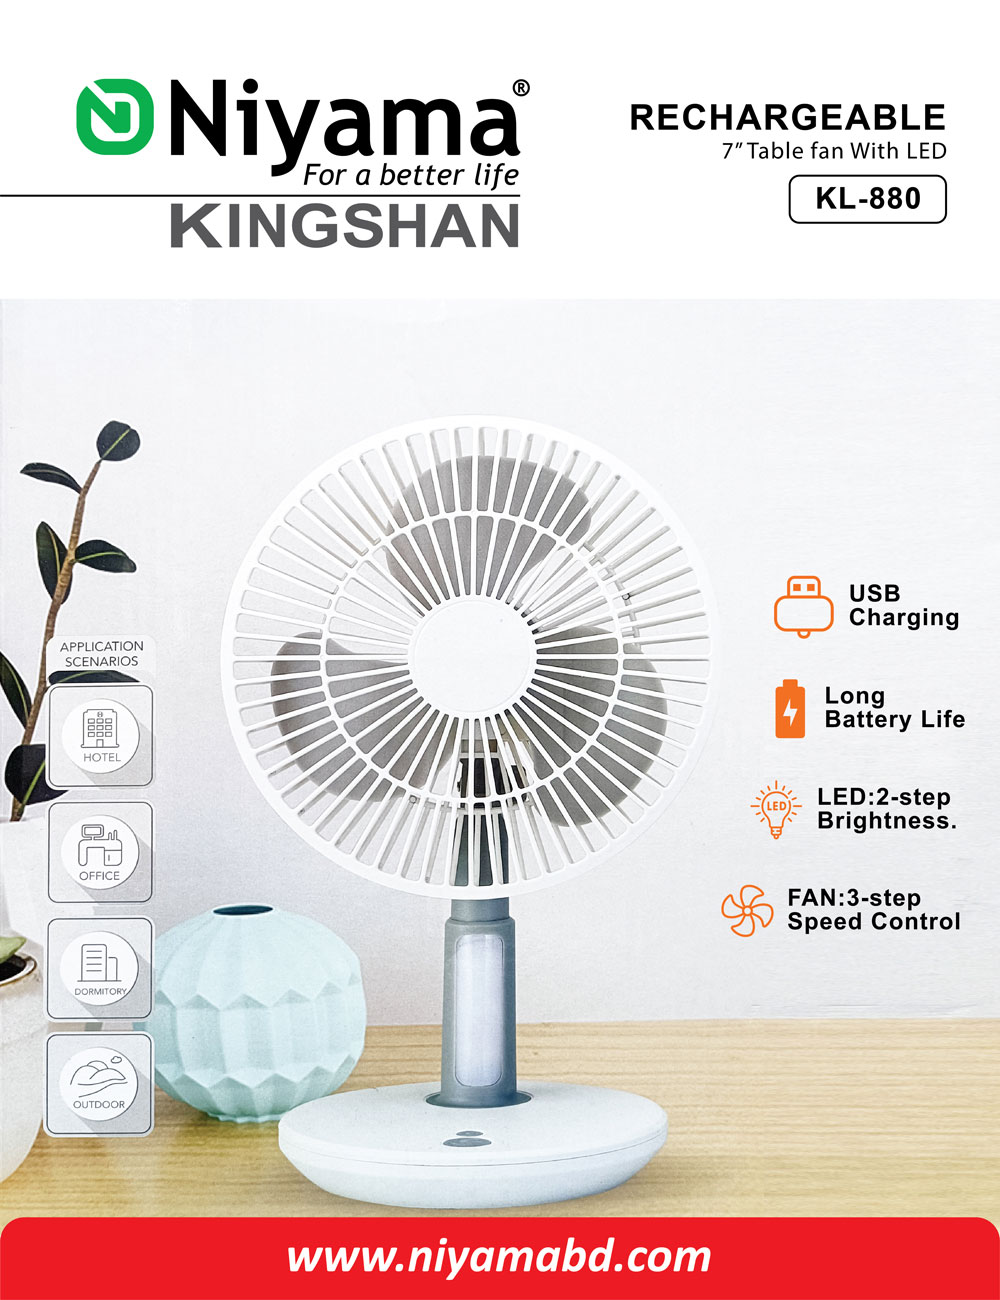 Stay Cool Anywhere You Go with the KL-880 Rechargeable Mini Fan!